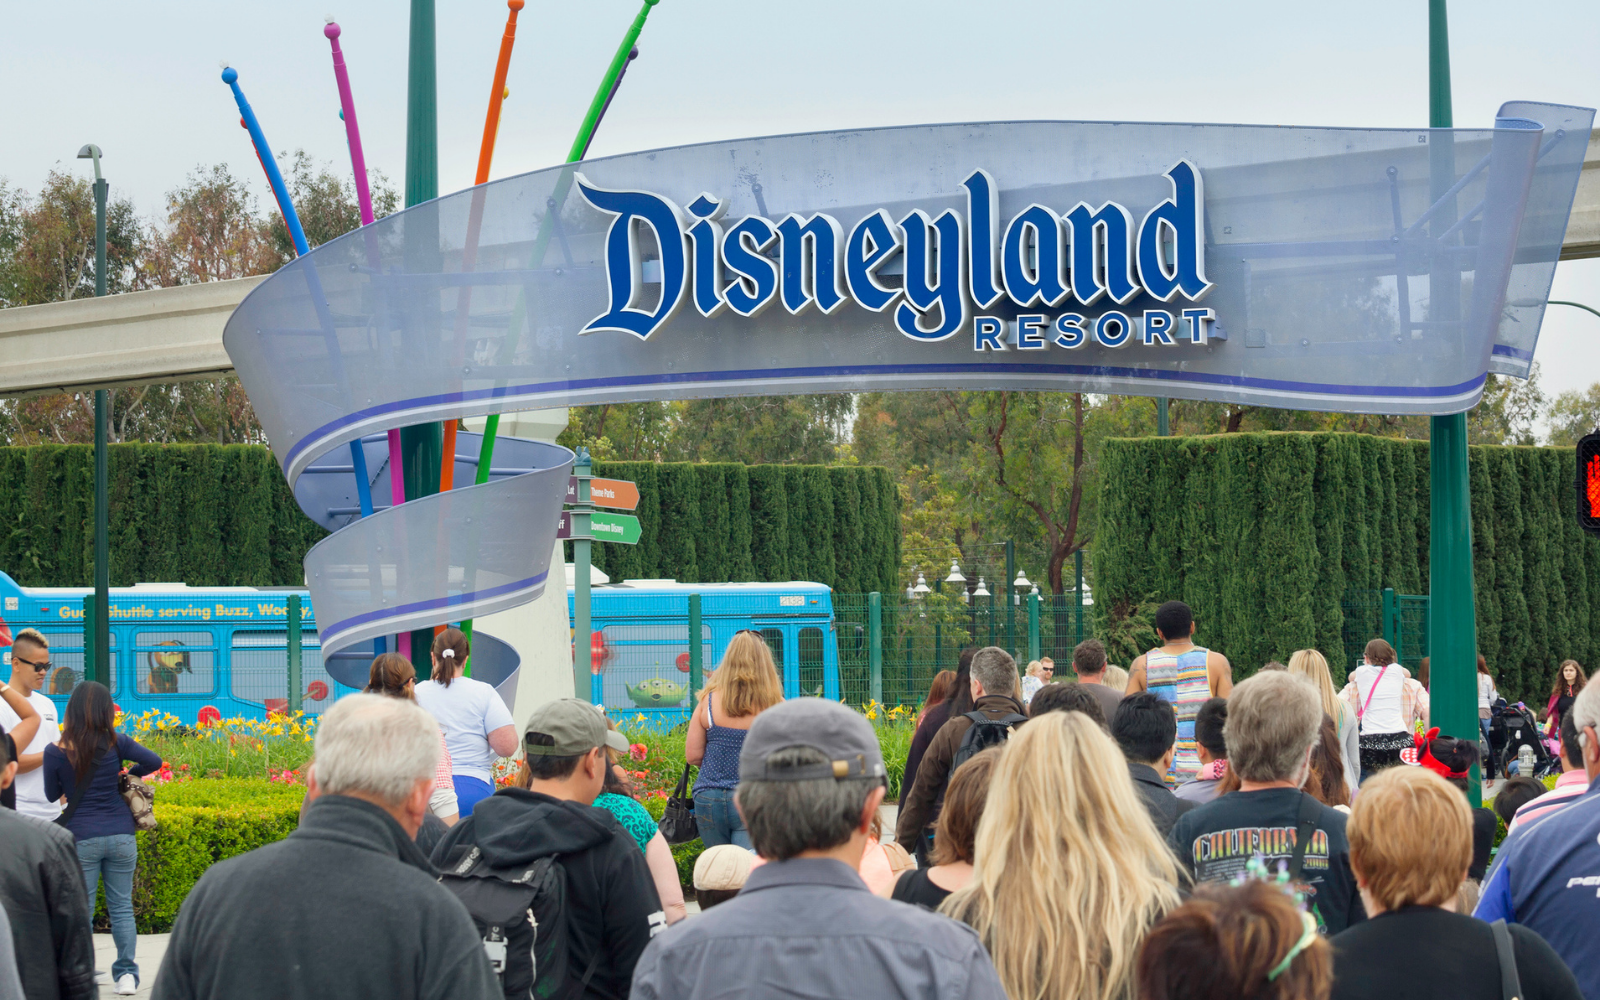 The Best Time to Visit Disneyland in 2022